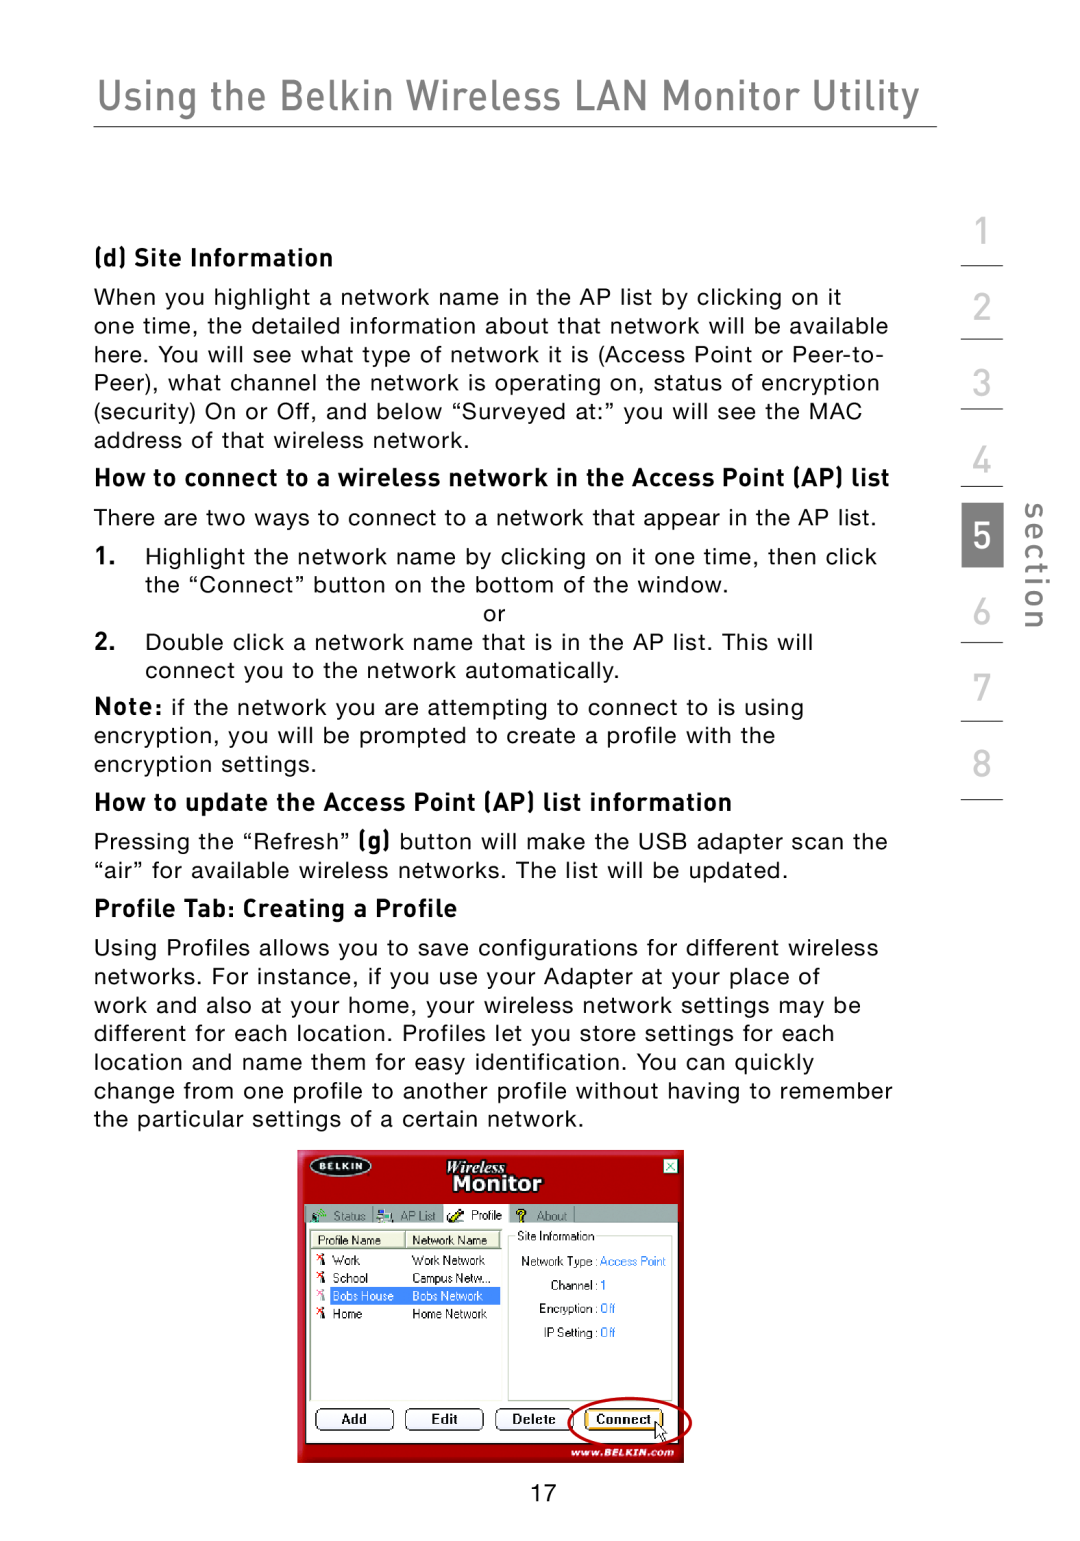 Belkin F5D7051 manual d Site Information, How to connect to a wireless network in the Access Point AP list, section 